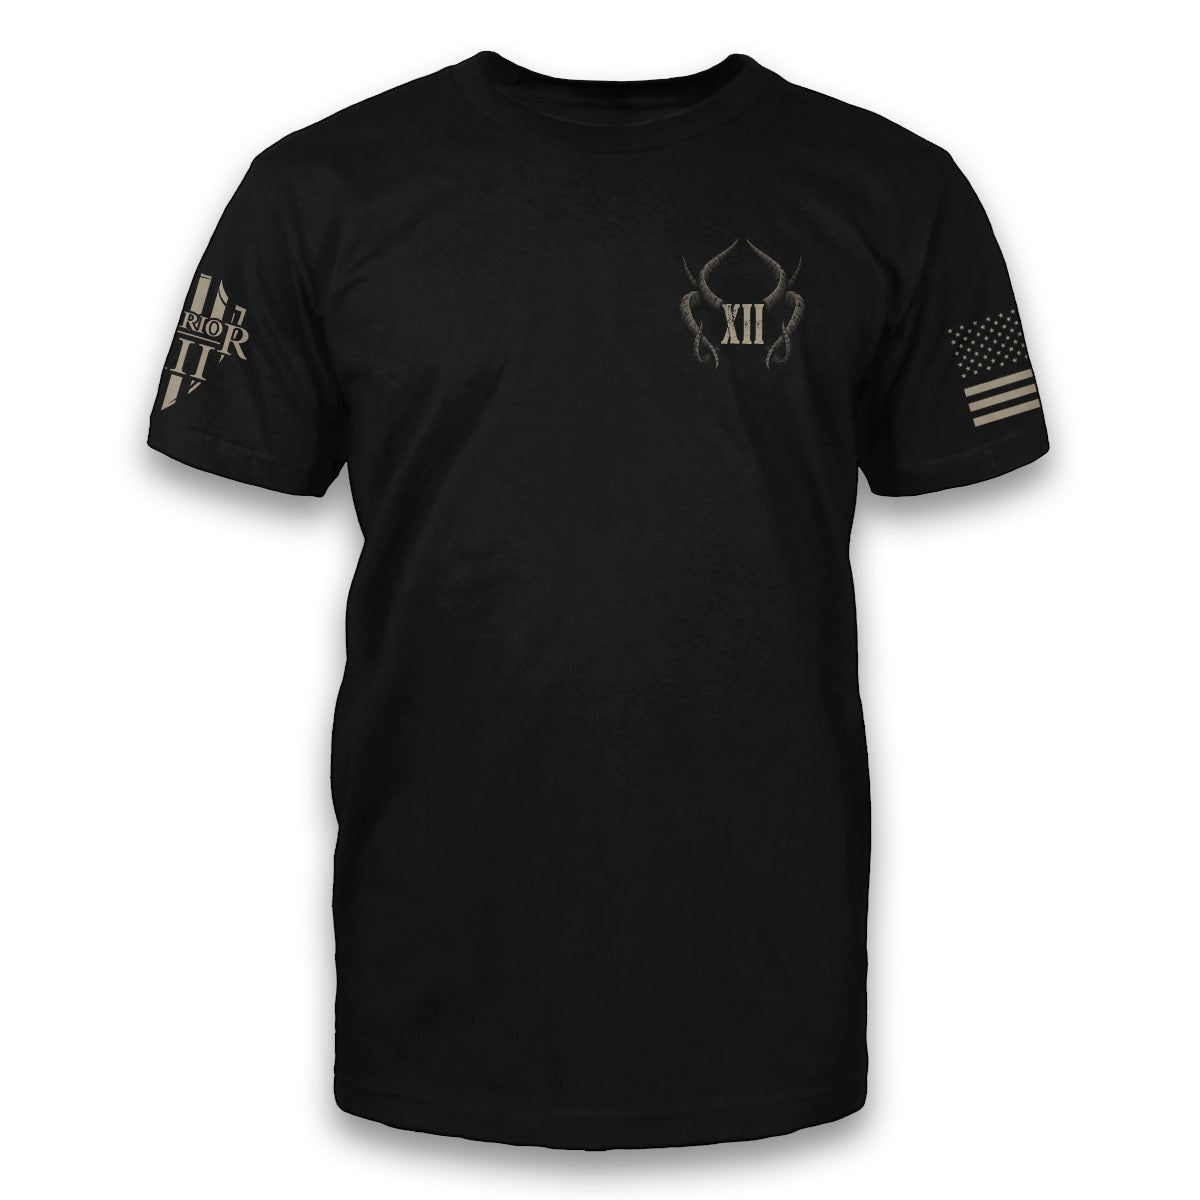 A black t-shirt with roman numerals XII and horns coming out of it printed on the front.